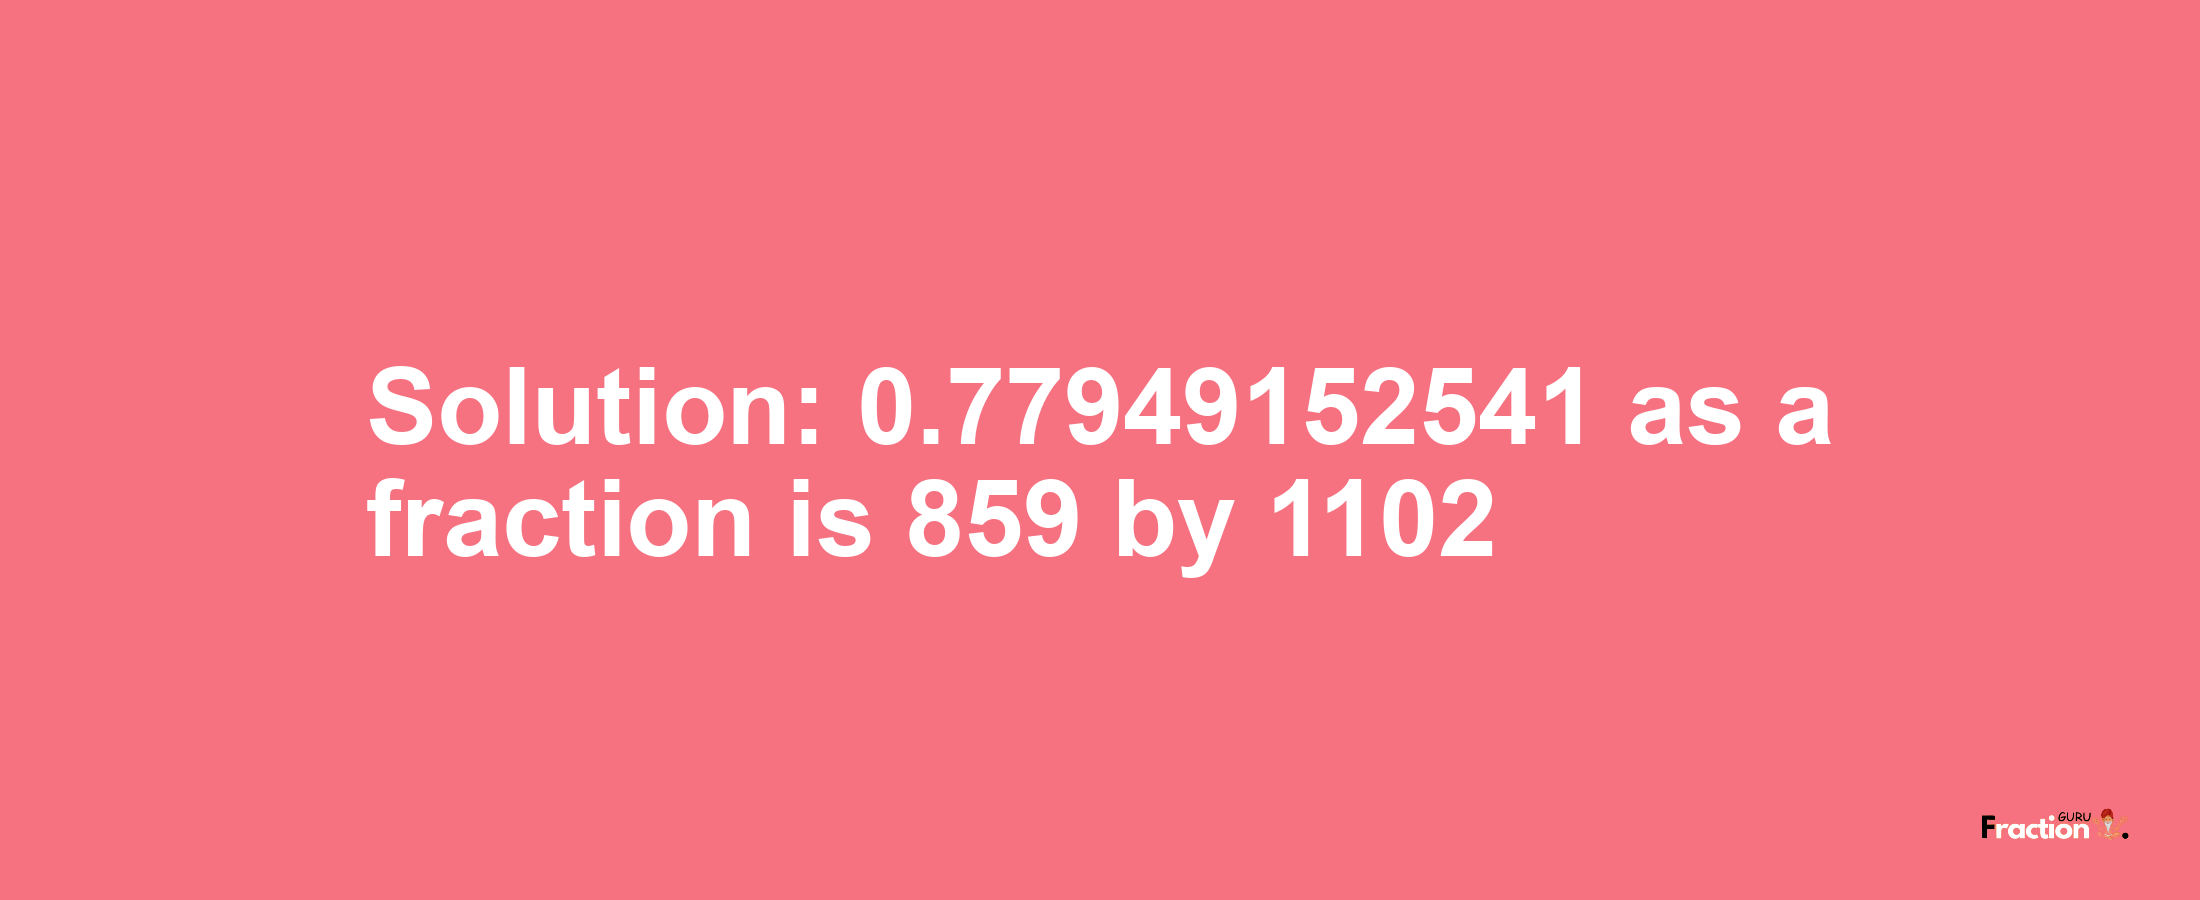 Solution:0.77949152541 as a fraction is 859/1102